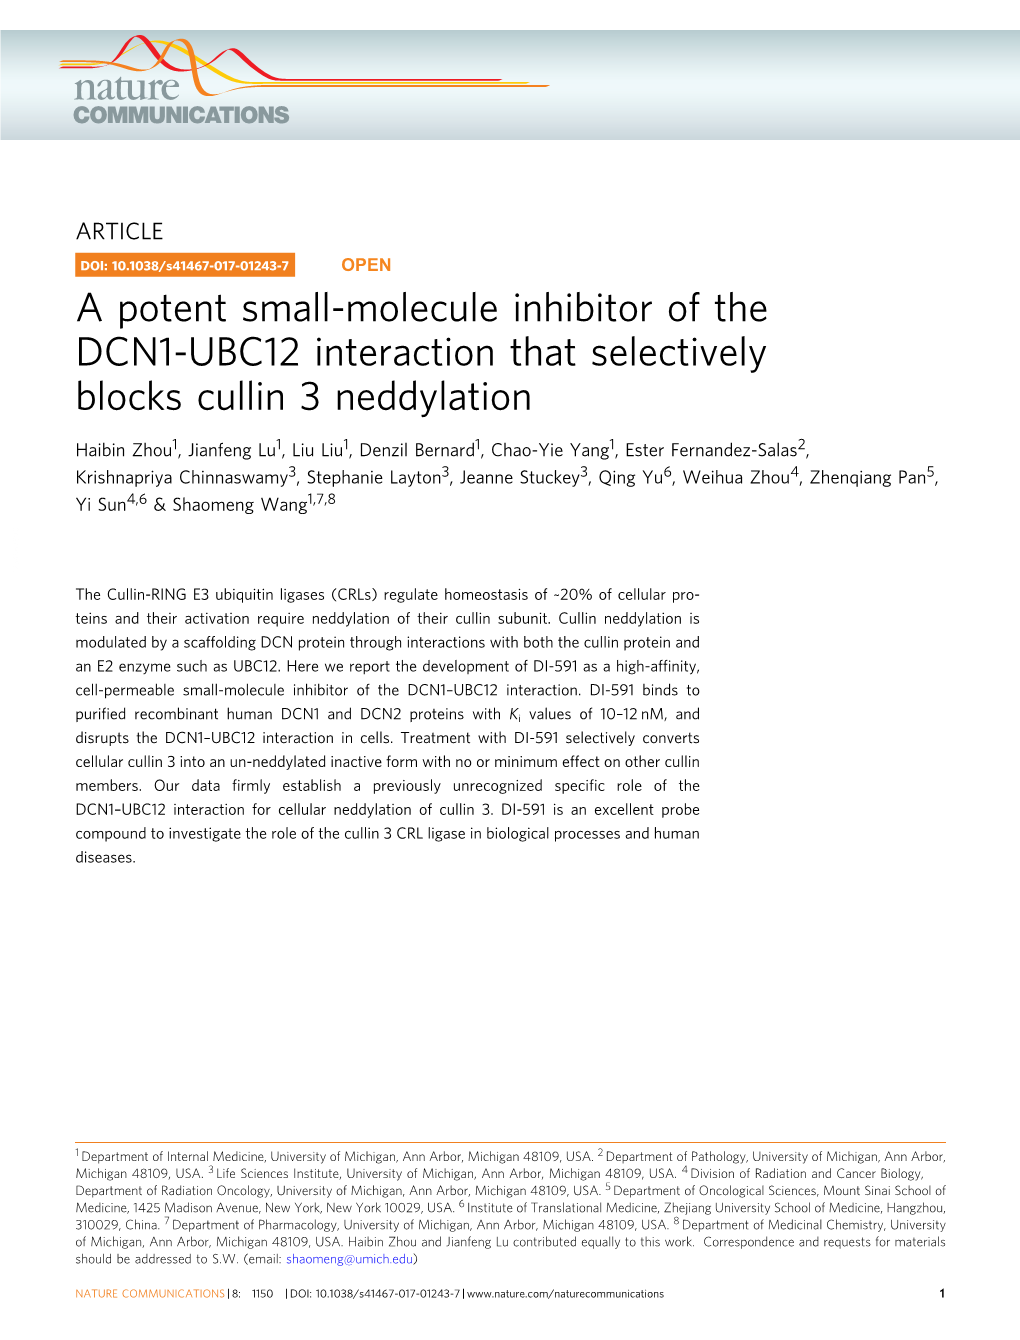 A Potent Small-Molecule Inhibitor of the DCN1-UBC12 Interaction That Selectively Blocks Cullin 3 Neddylation